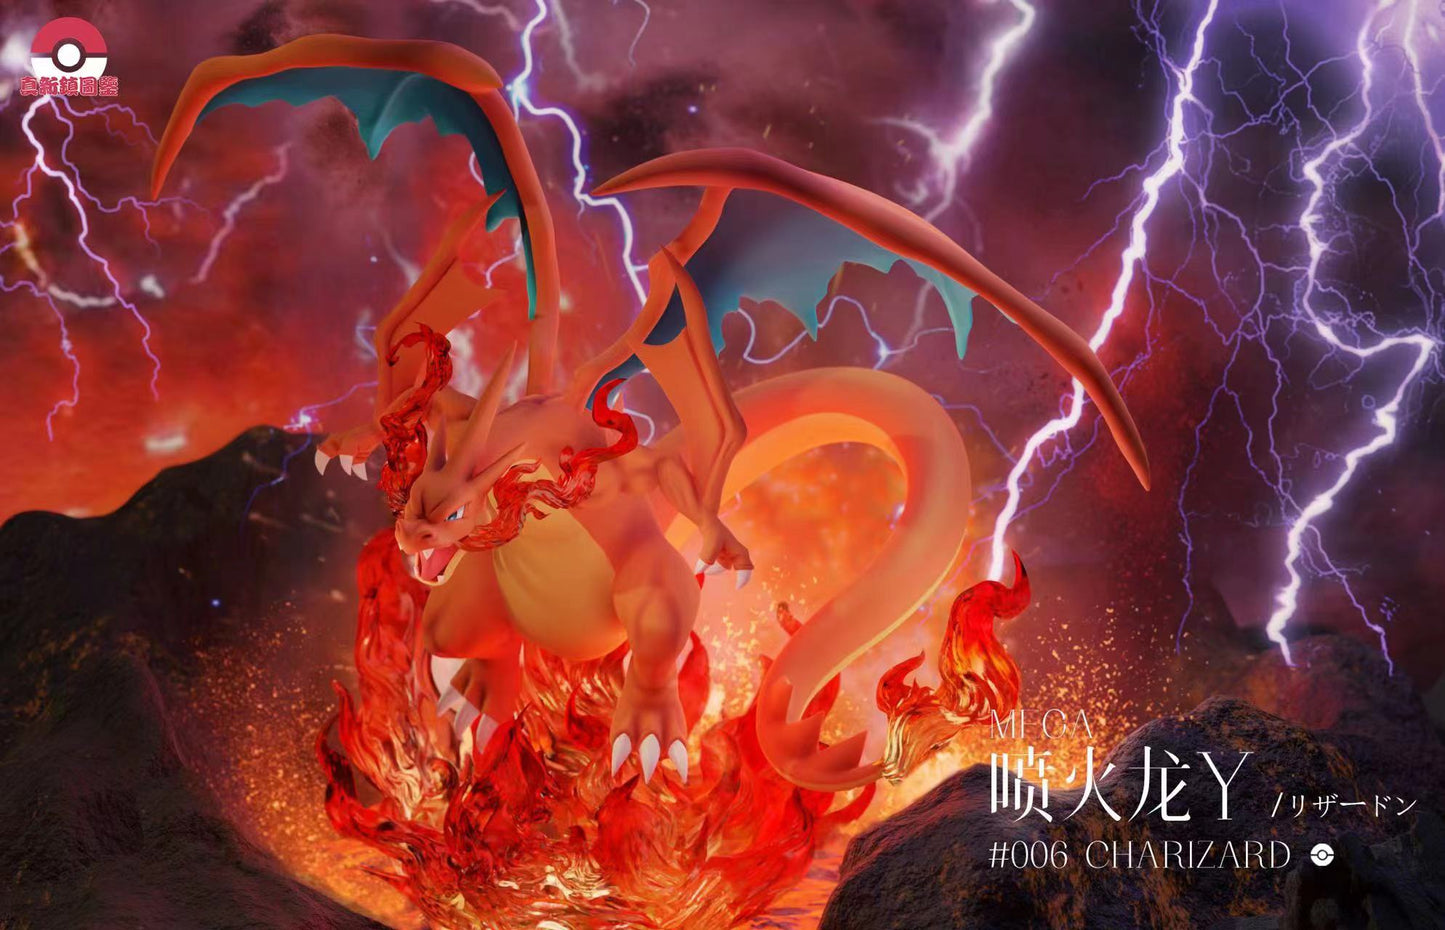 [PREORDER] 1/20 Scale World Figure [PALLET TOWN] - Mega Charizard X&Y